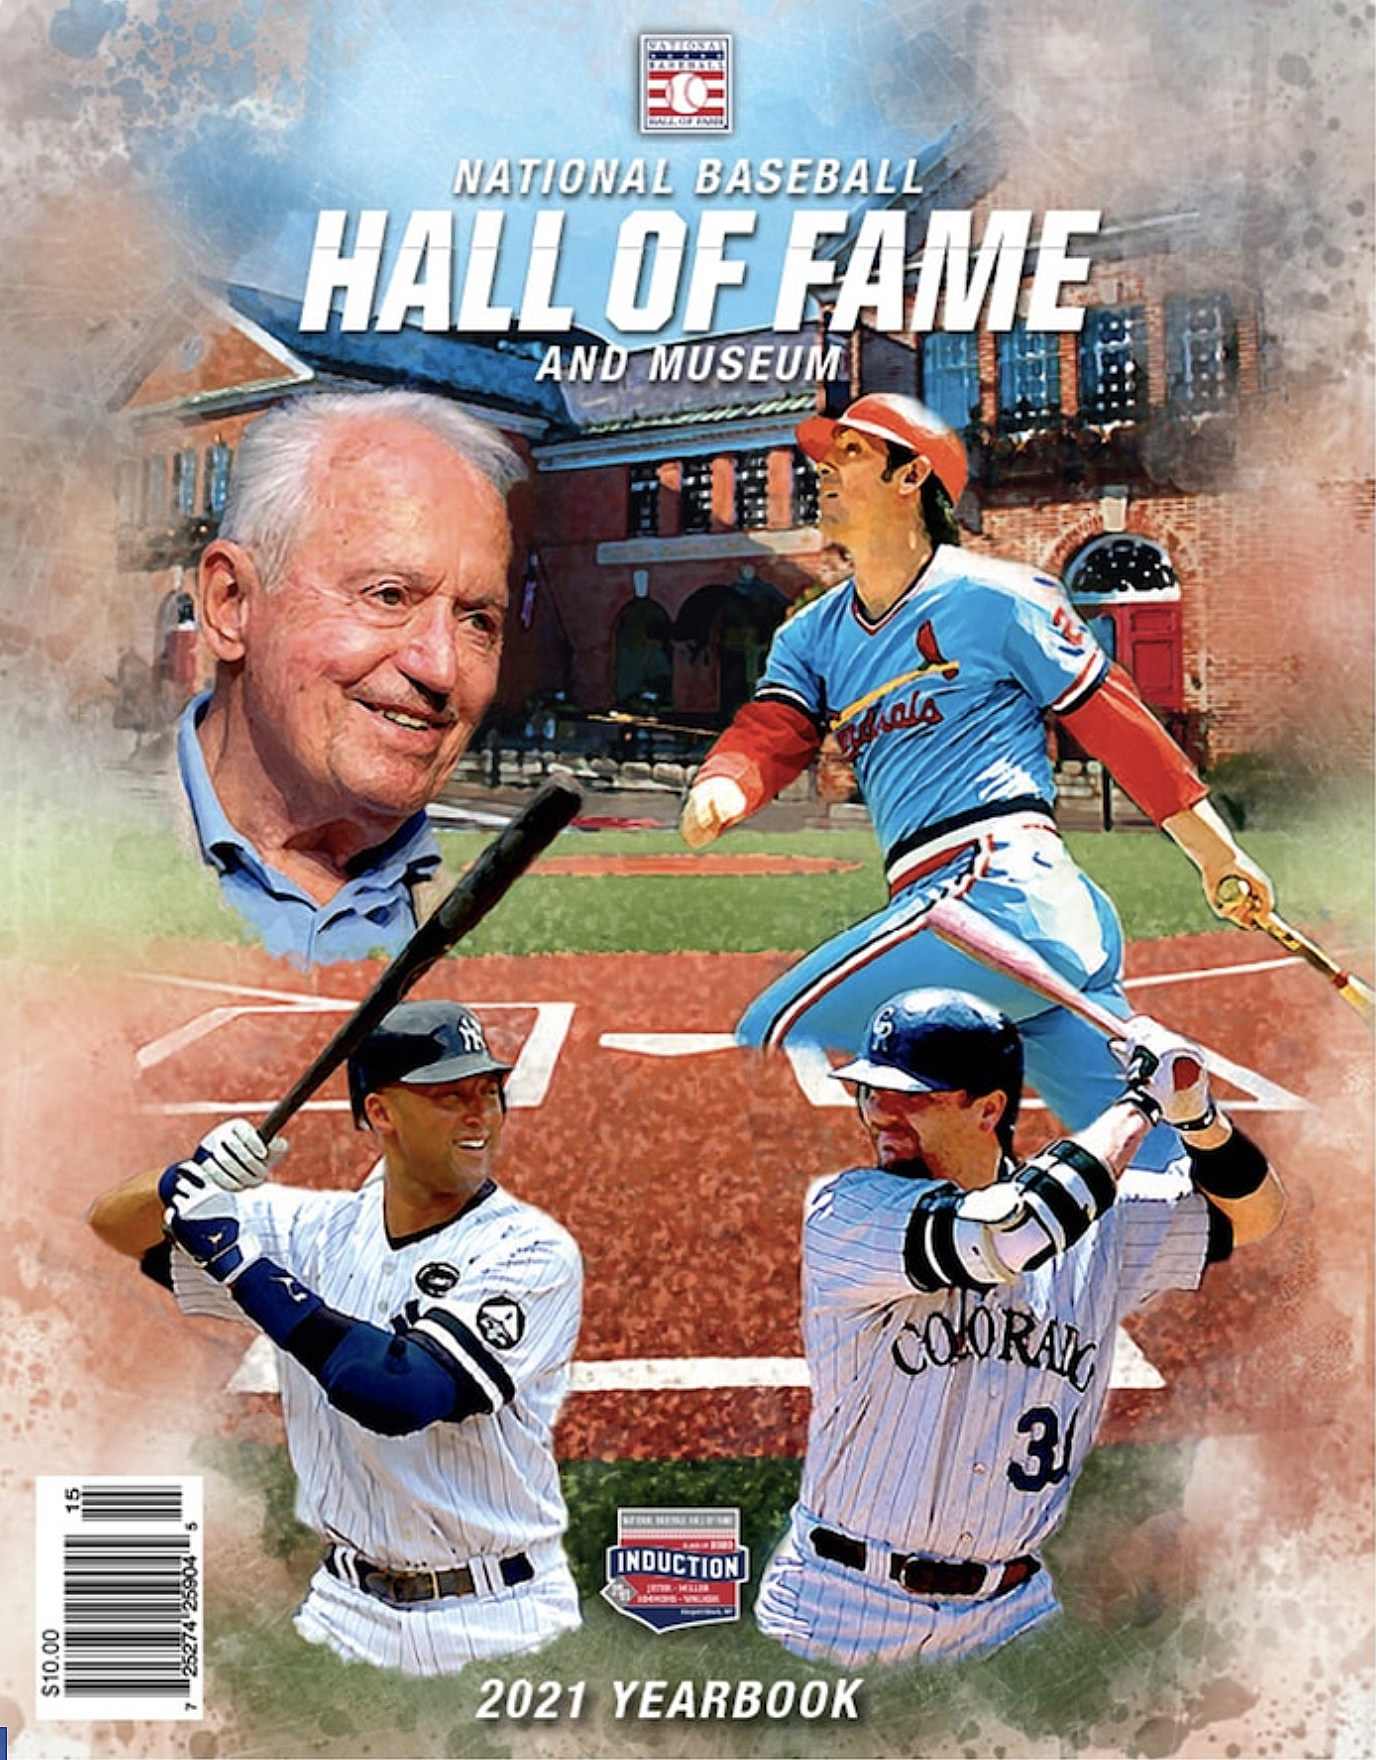 Hall Of Fame Yearbook Keeper Of Baseball Memories All Generations image